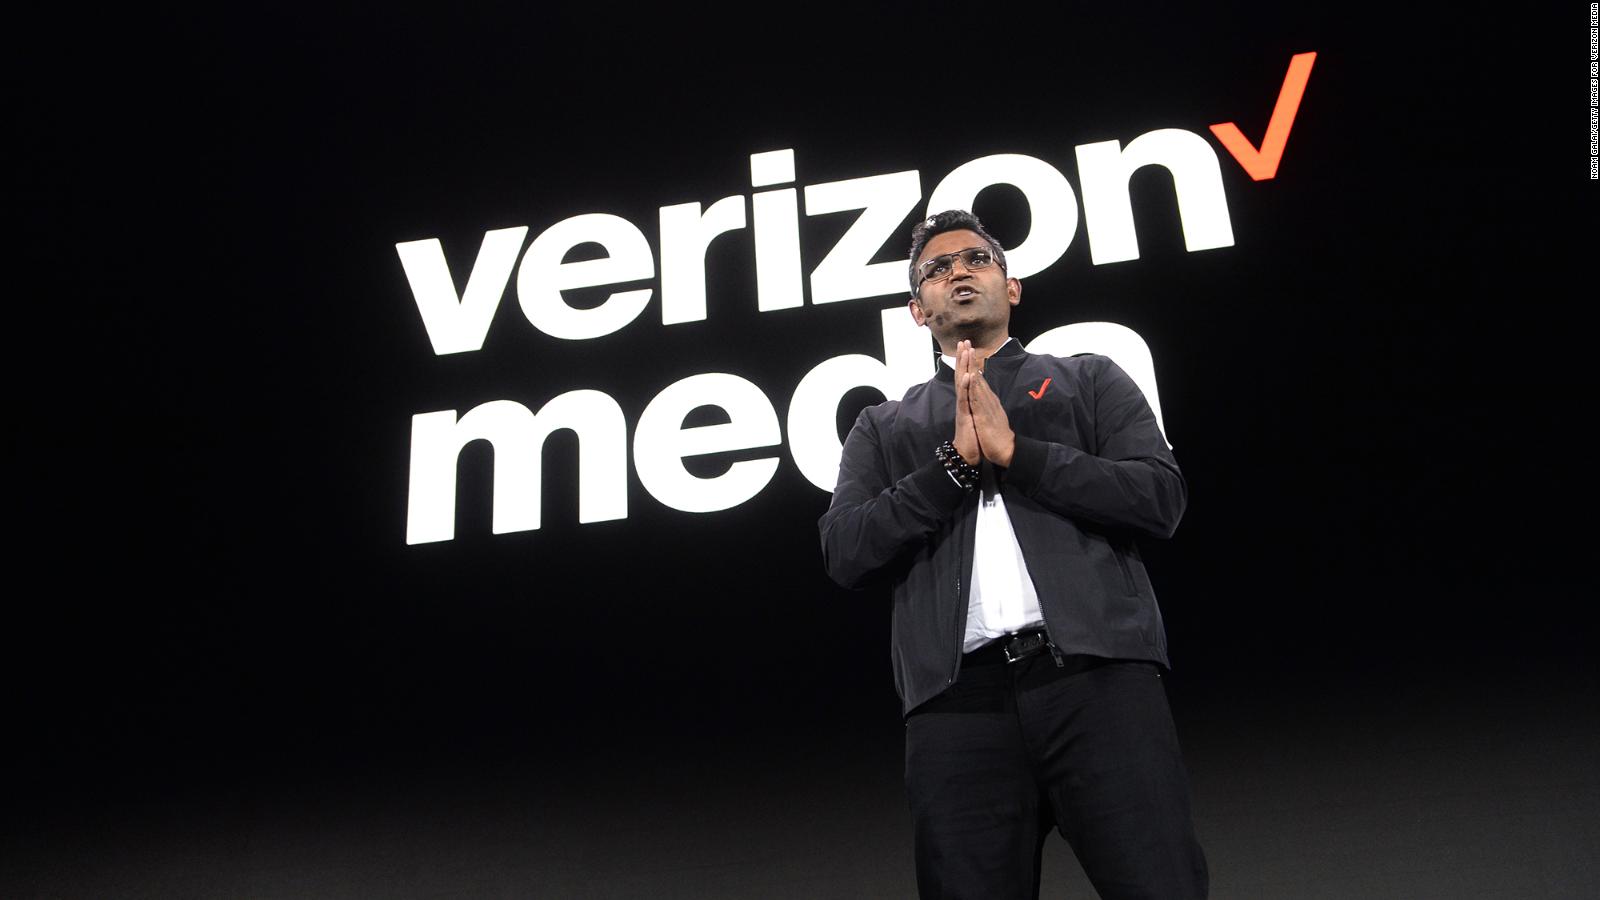 Verizon’s new filter blocks spoofed phone numbers that are too close to yours